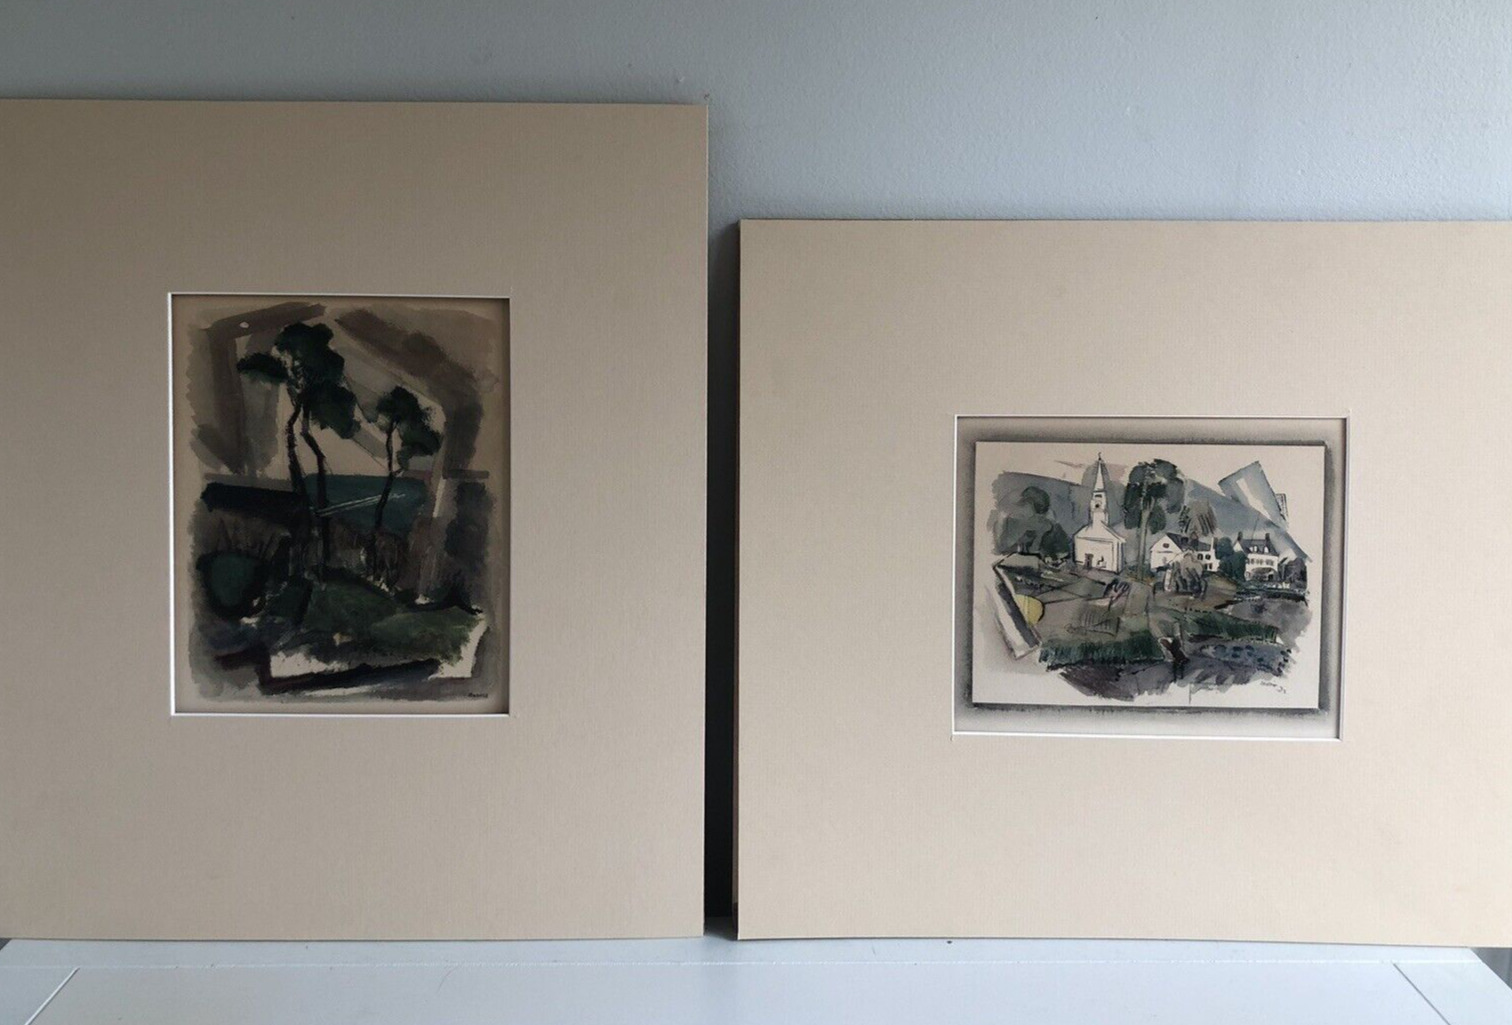 2 Antique John Marin Abstract Modernist Art Colotype Prints - Maine 1920’s